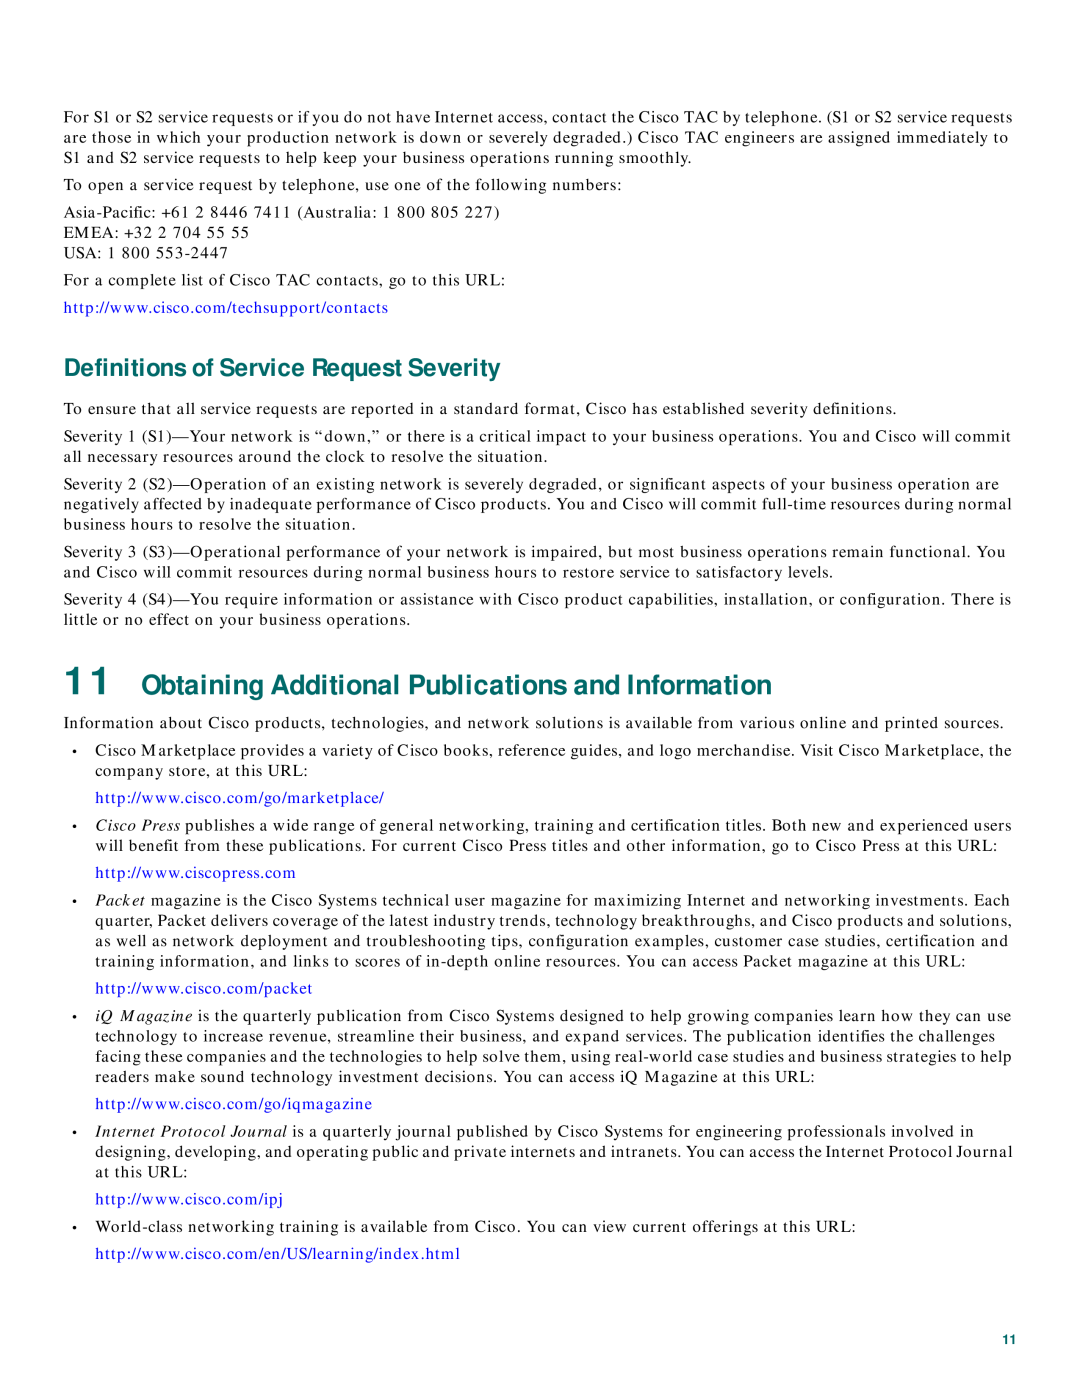 Cisco Systems CISCO1720 Obtaining Additional Publications and Information, Definitions of Service Request Severity 